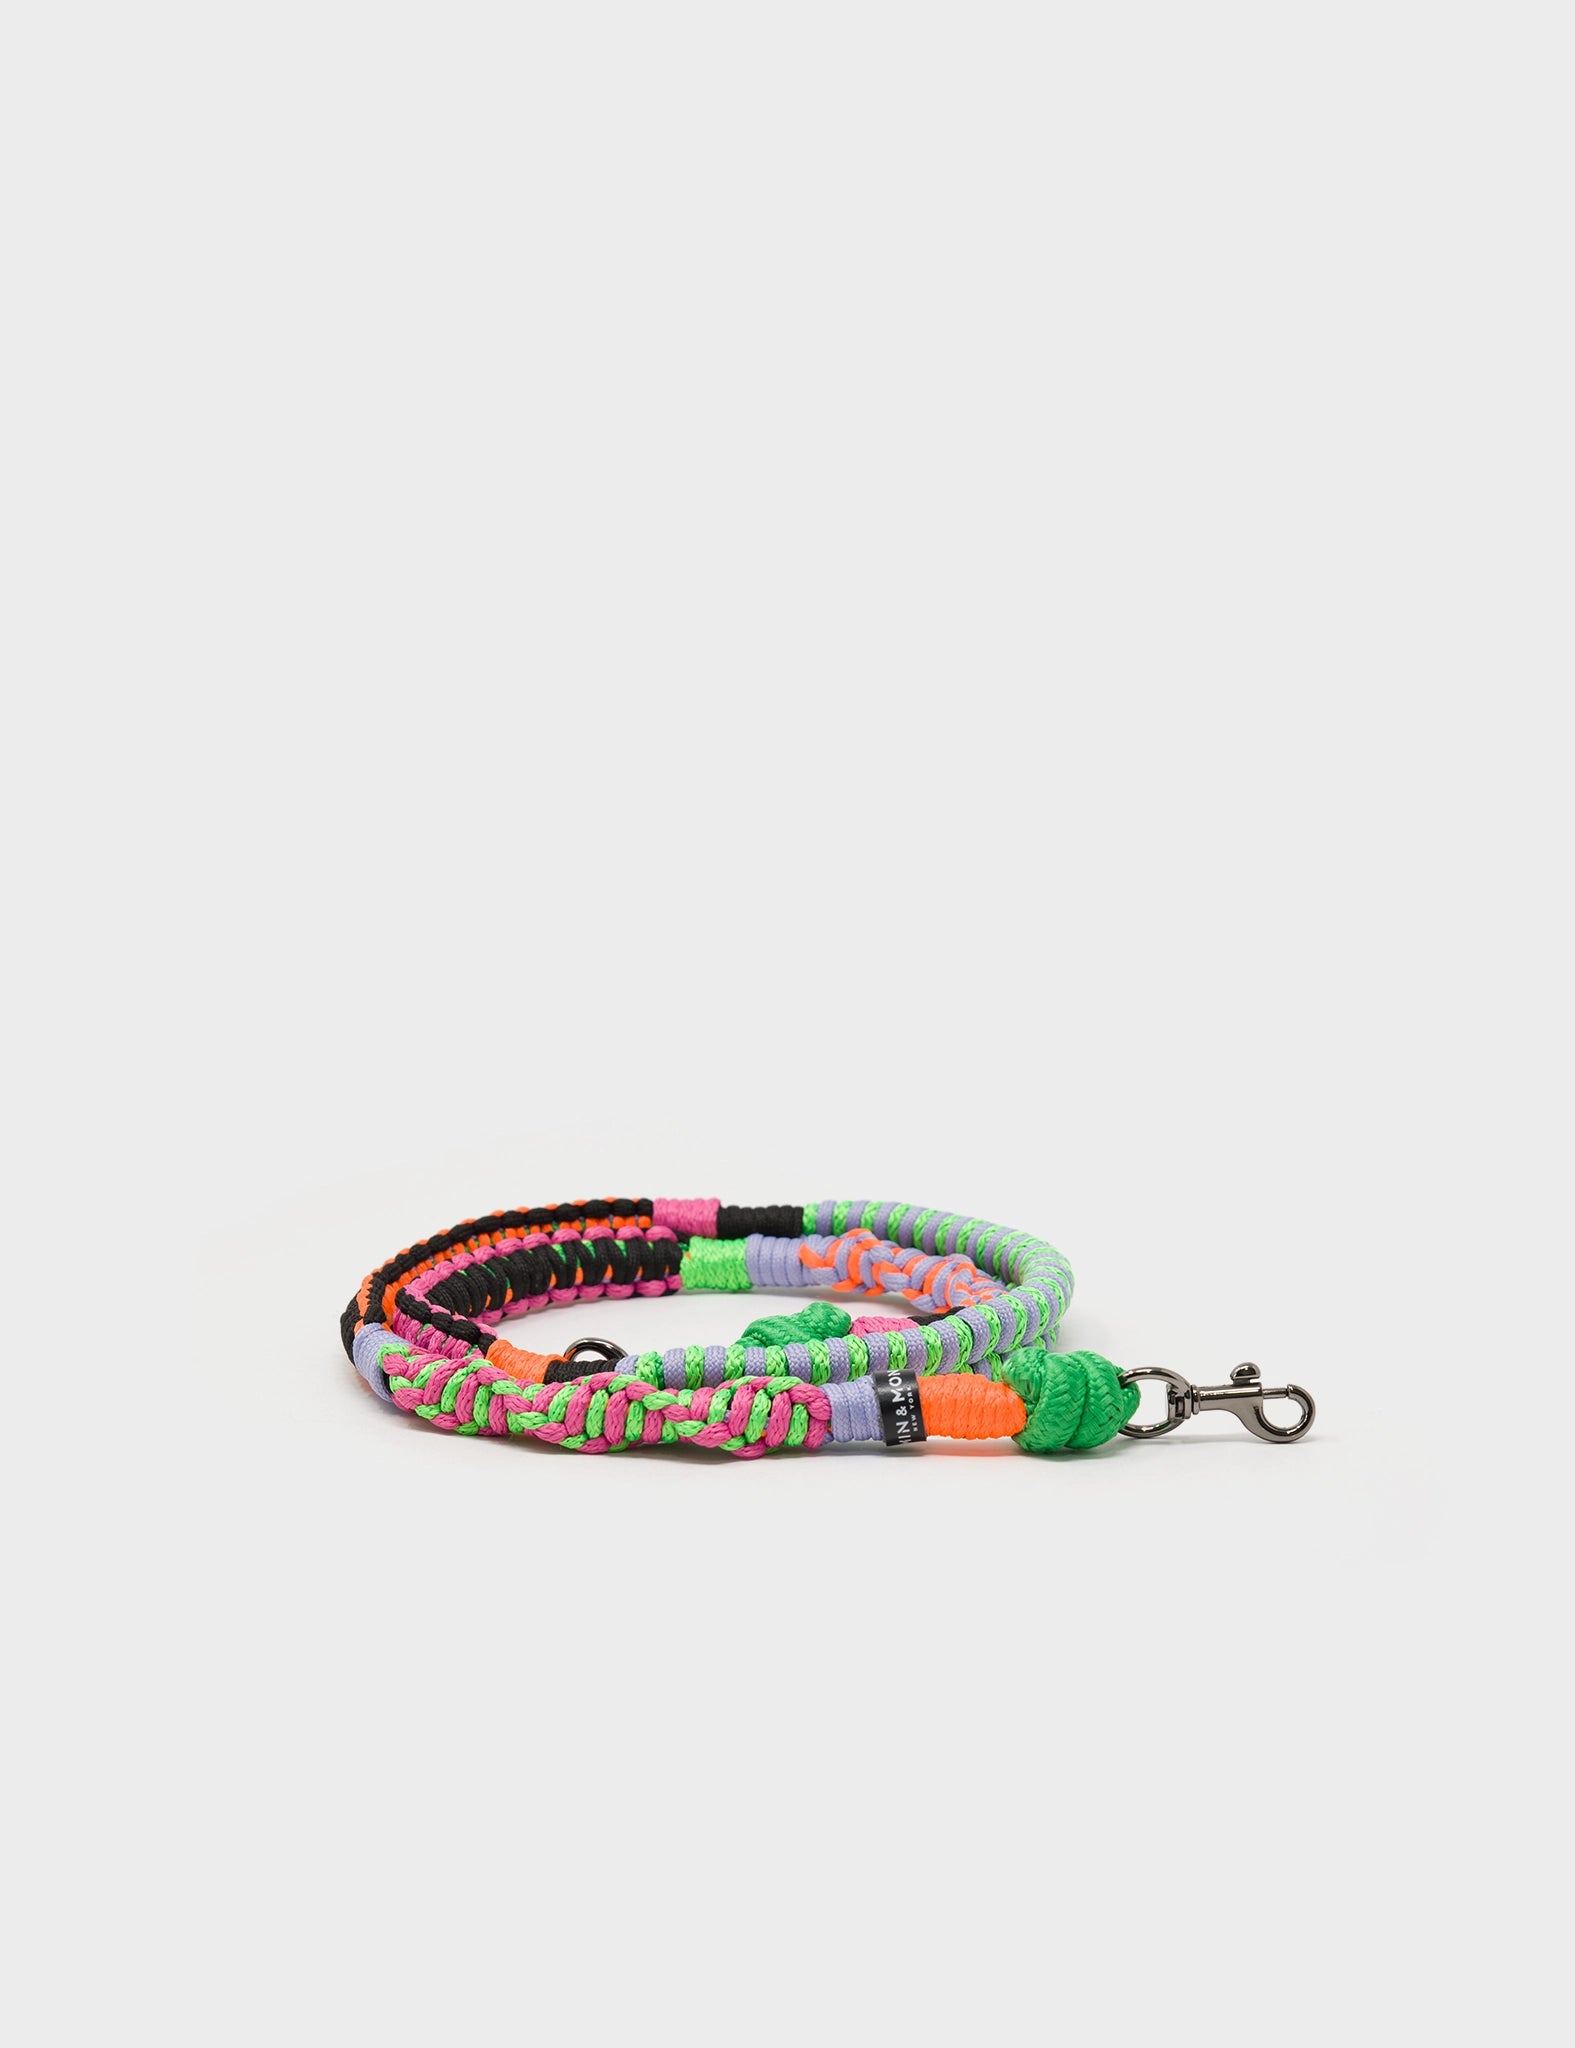 Interchangeable Handwoven Shoulder Strap - Biscay Green and Neon Colors